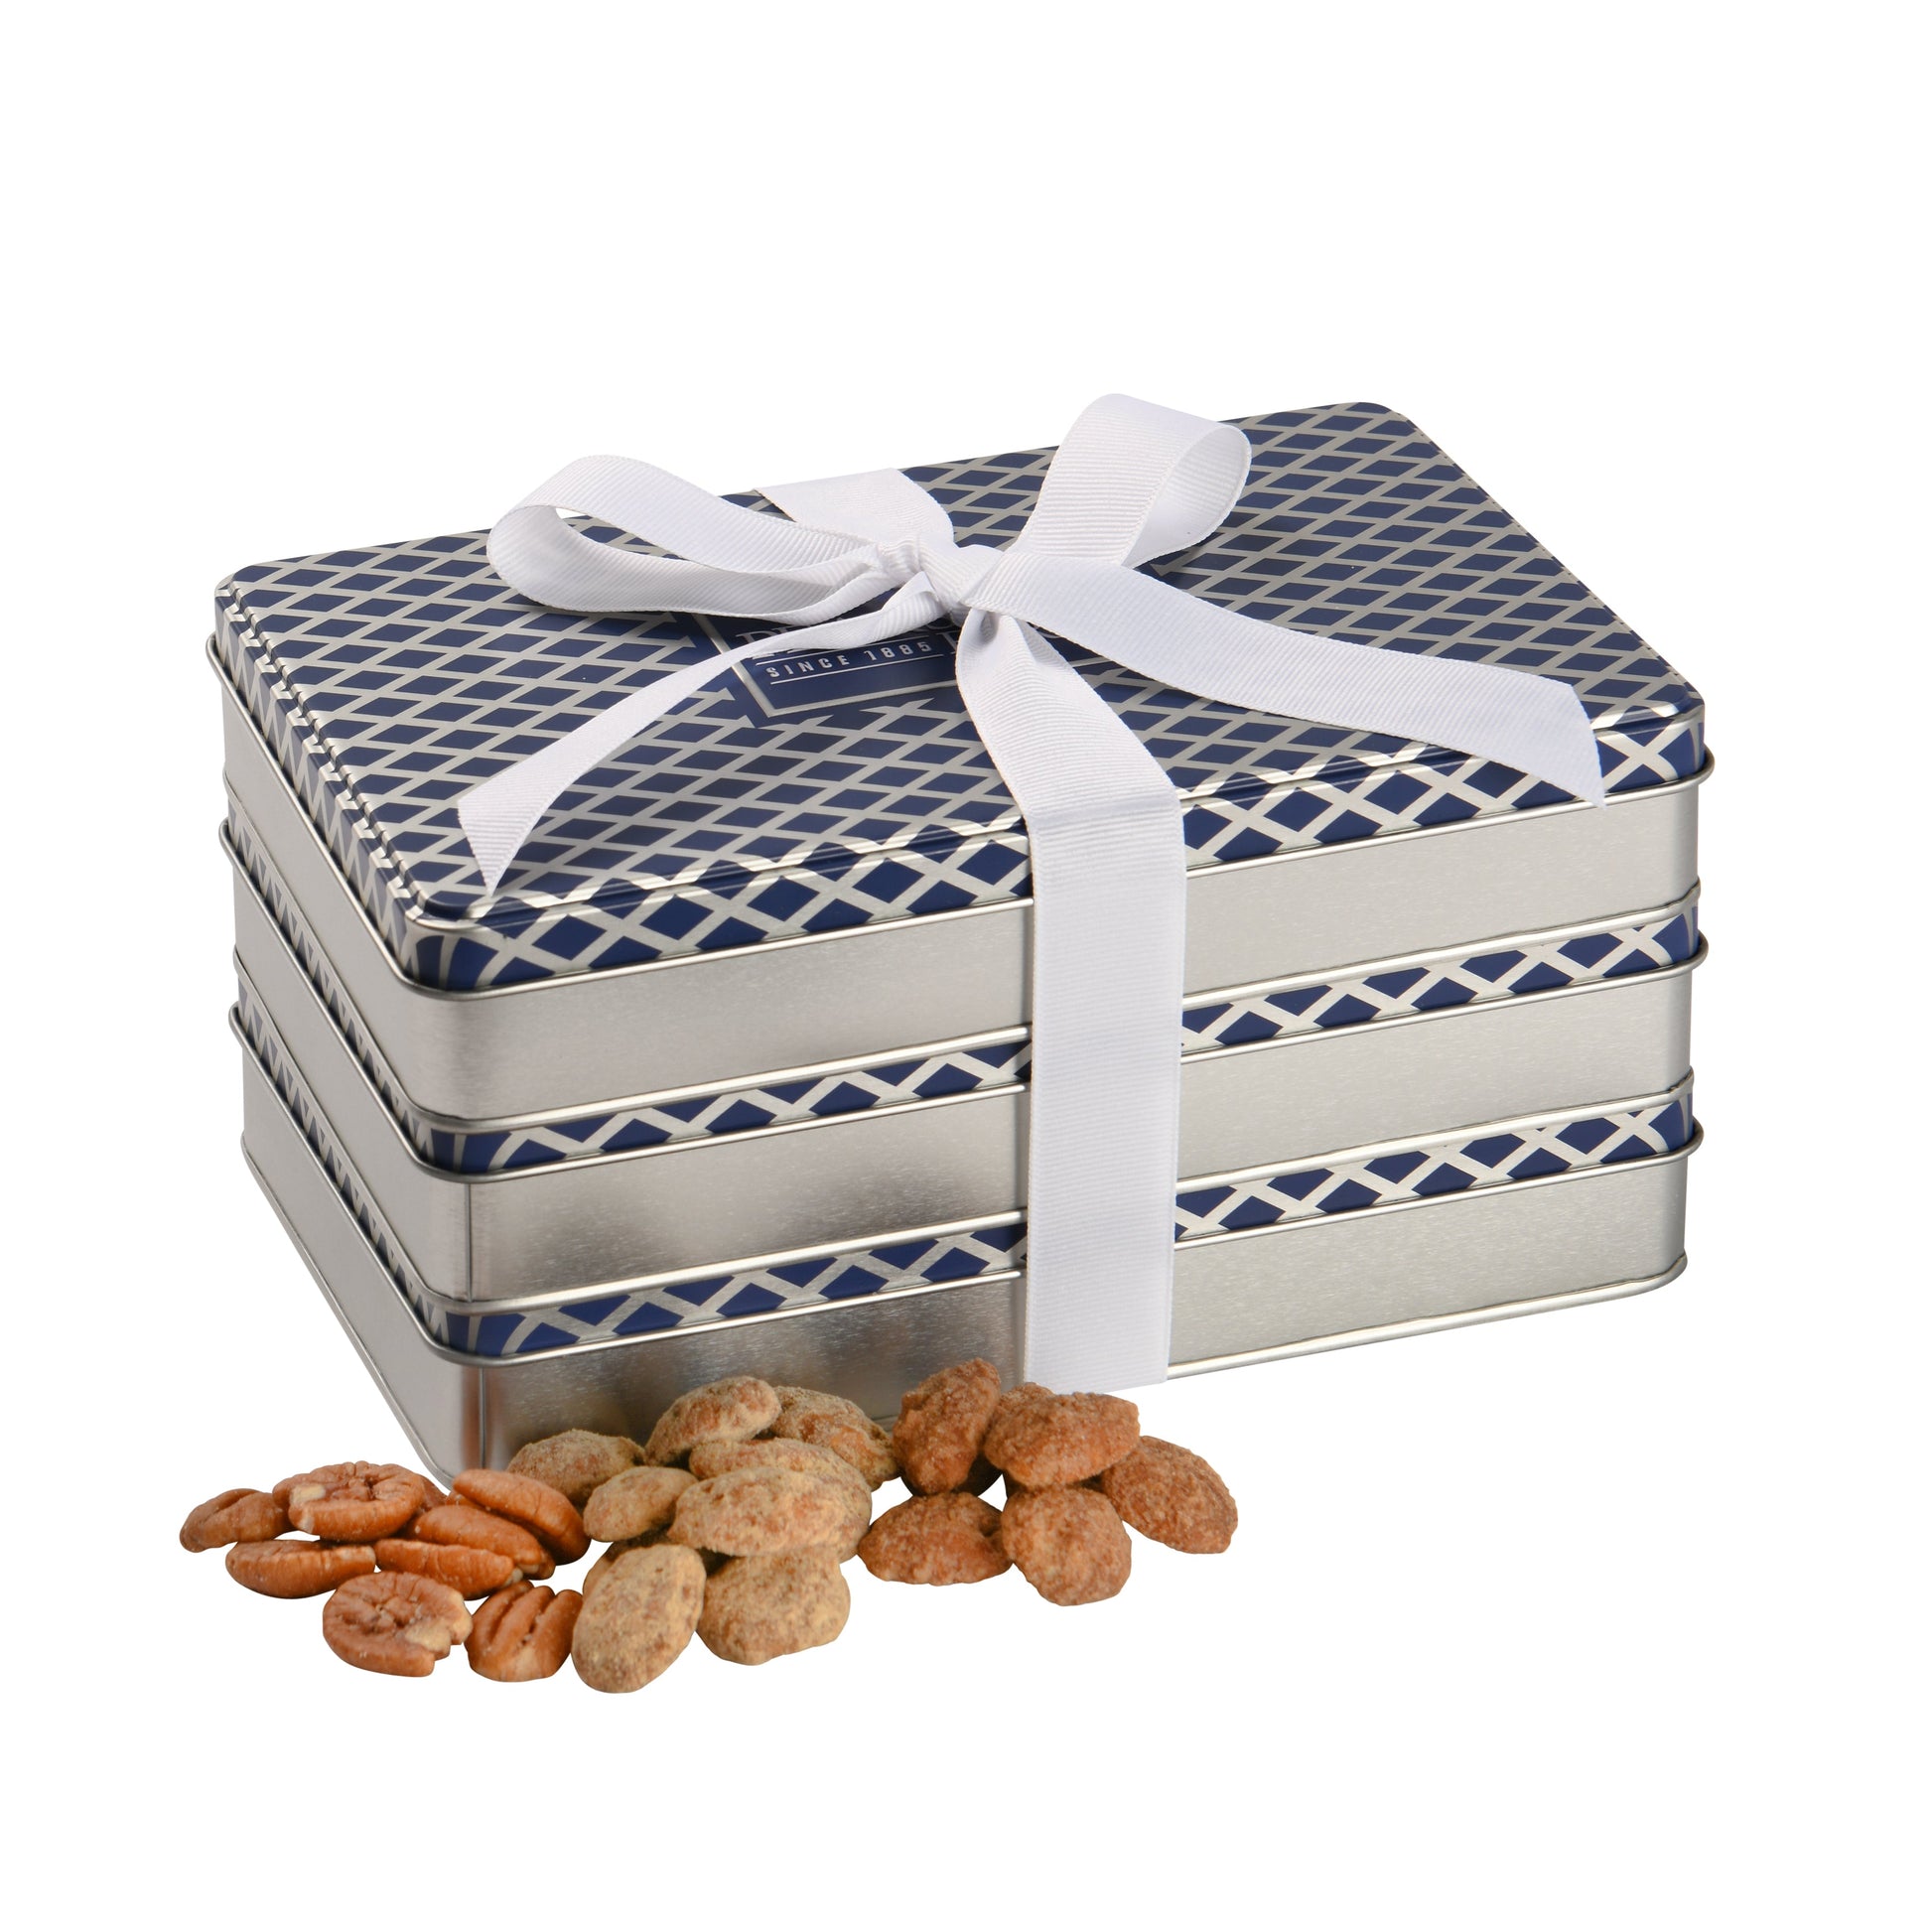 Our Variety Tin Stack is the perfect gift for any holiday